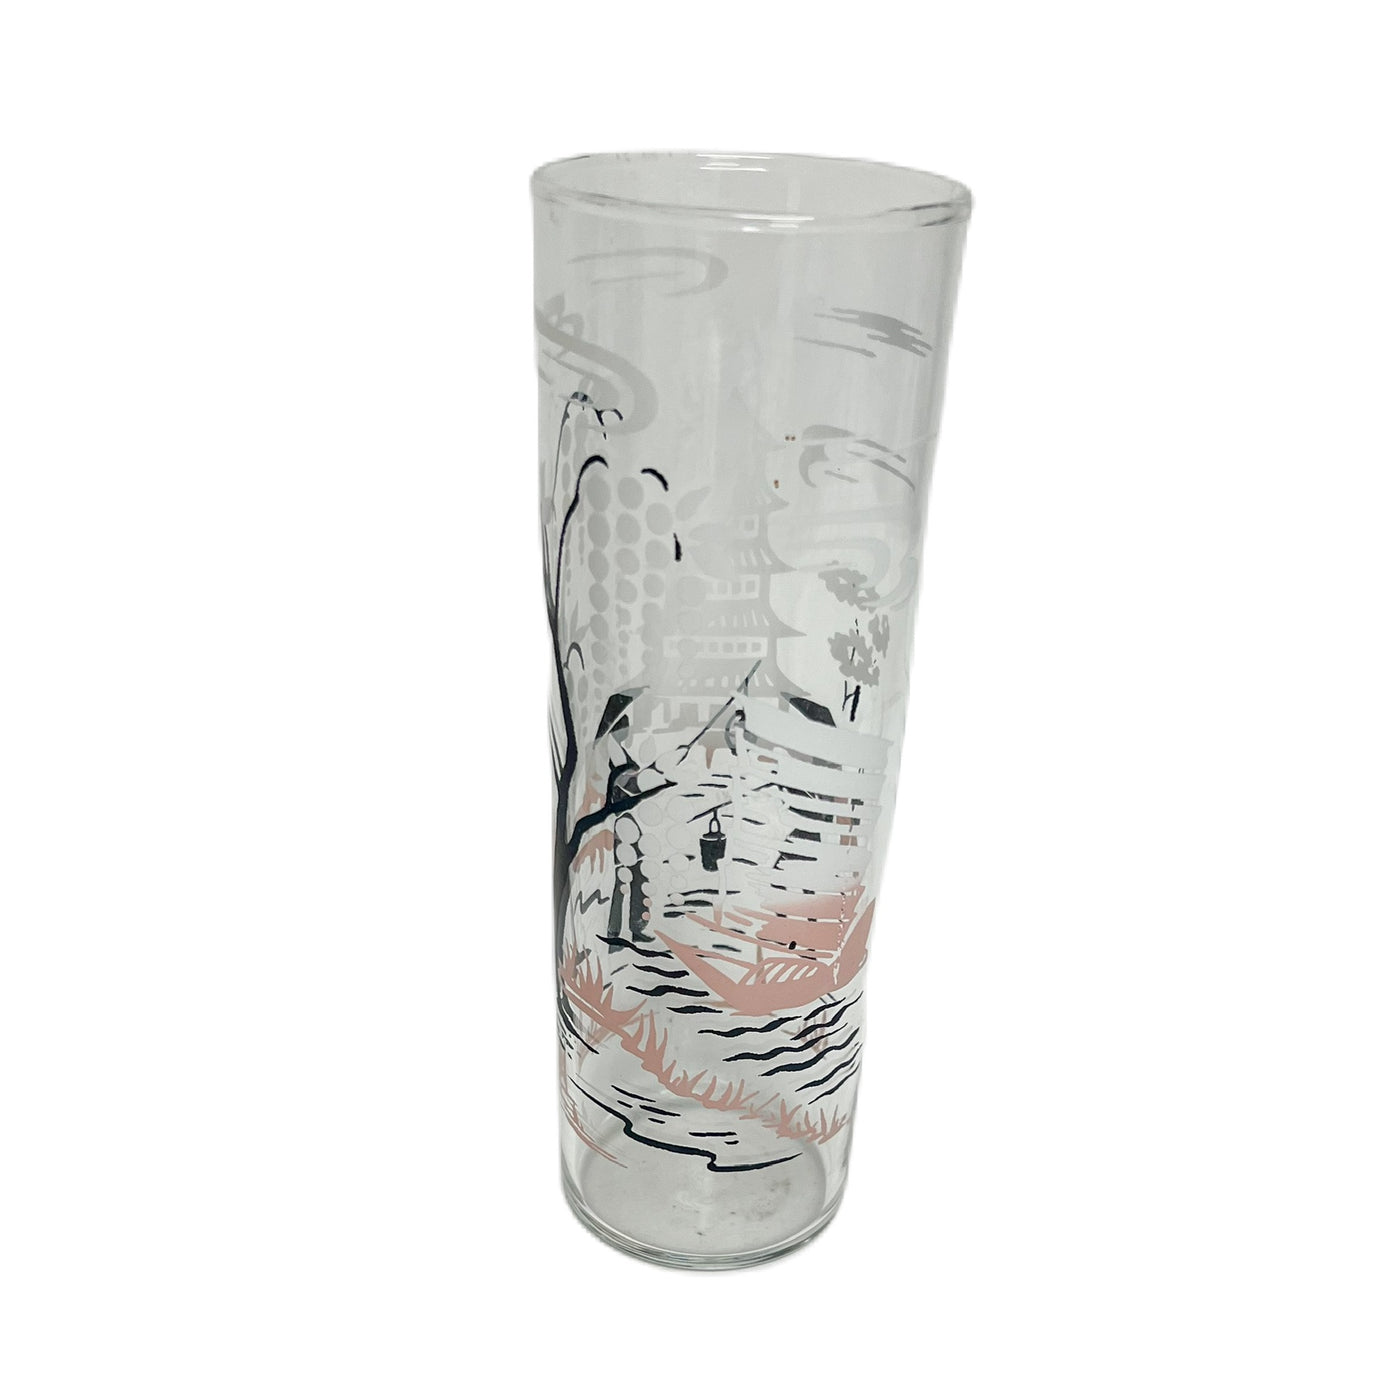 (23335) Set of Six Pink and Black Asian Themed Collins Glasses